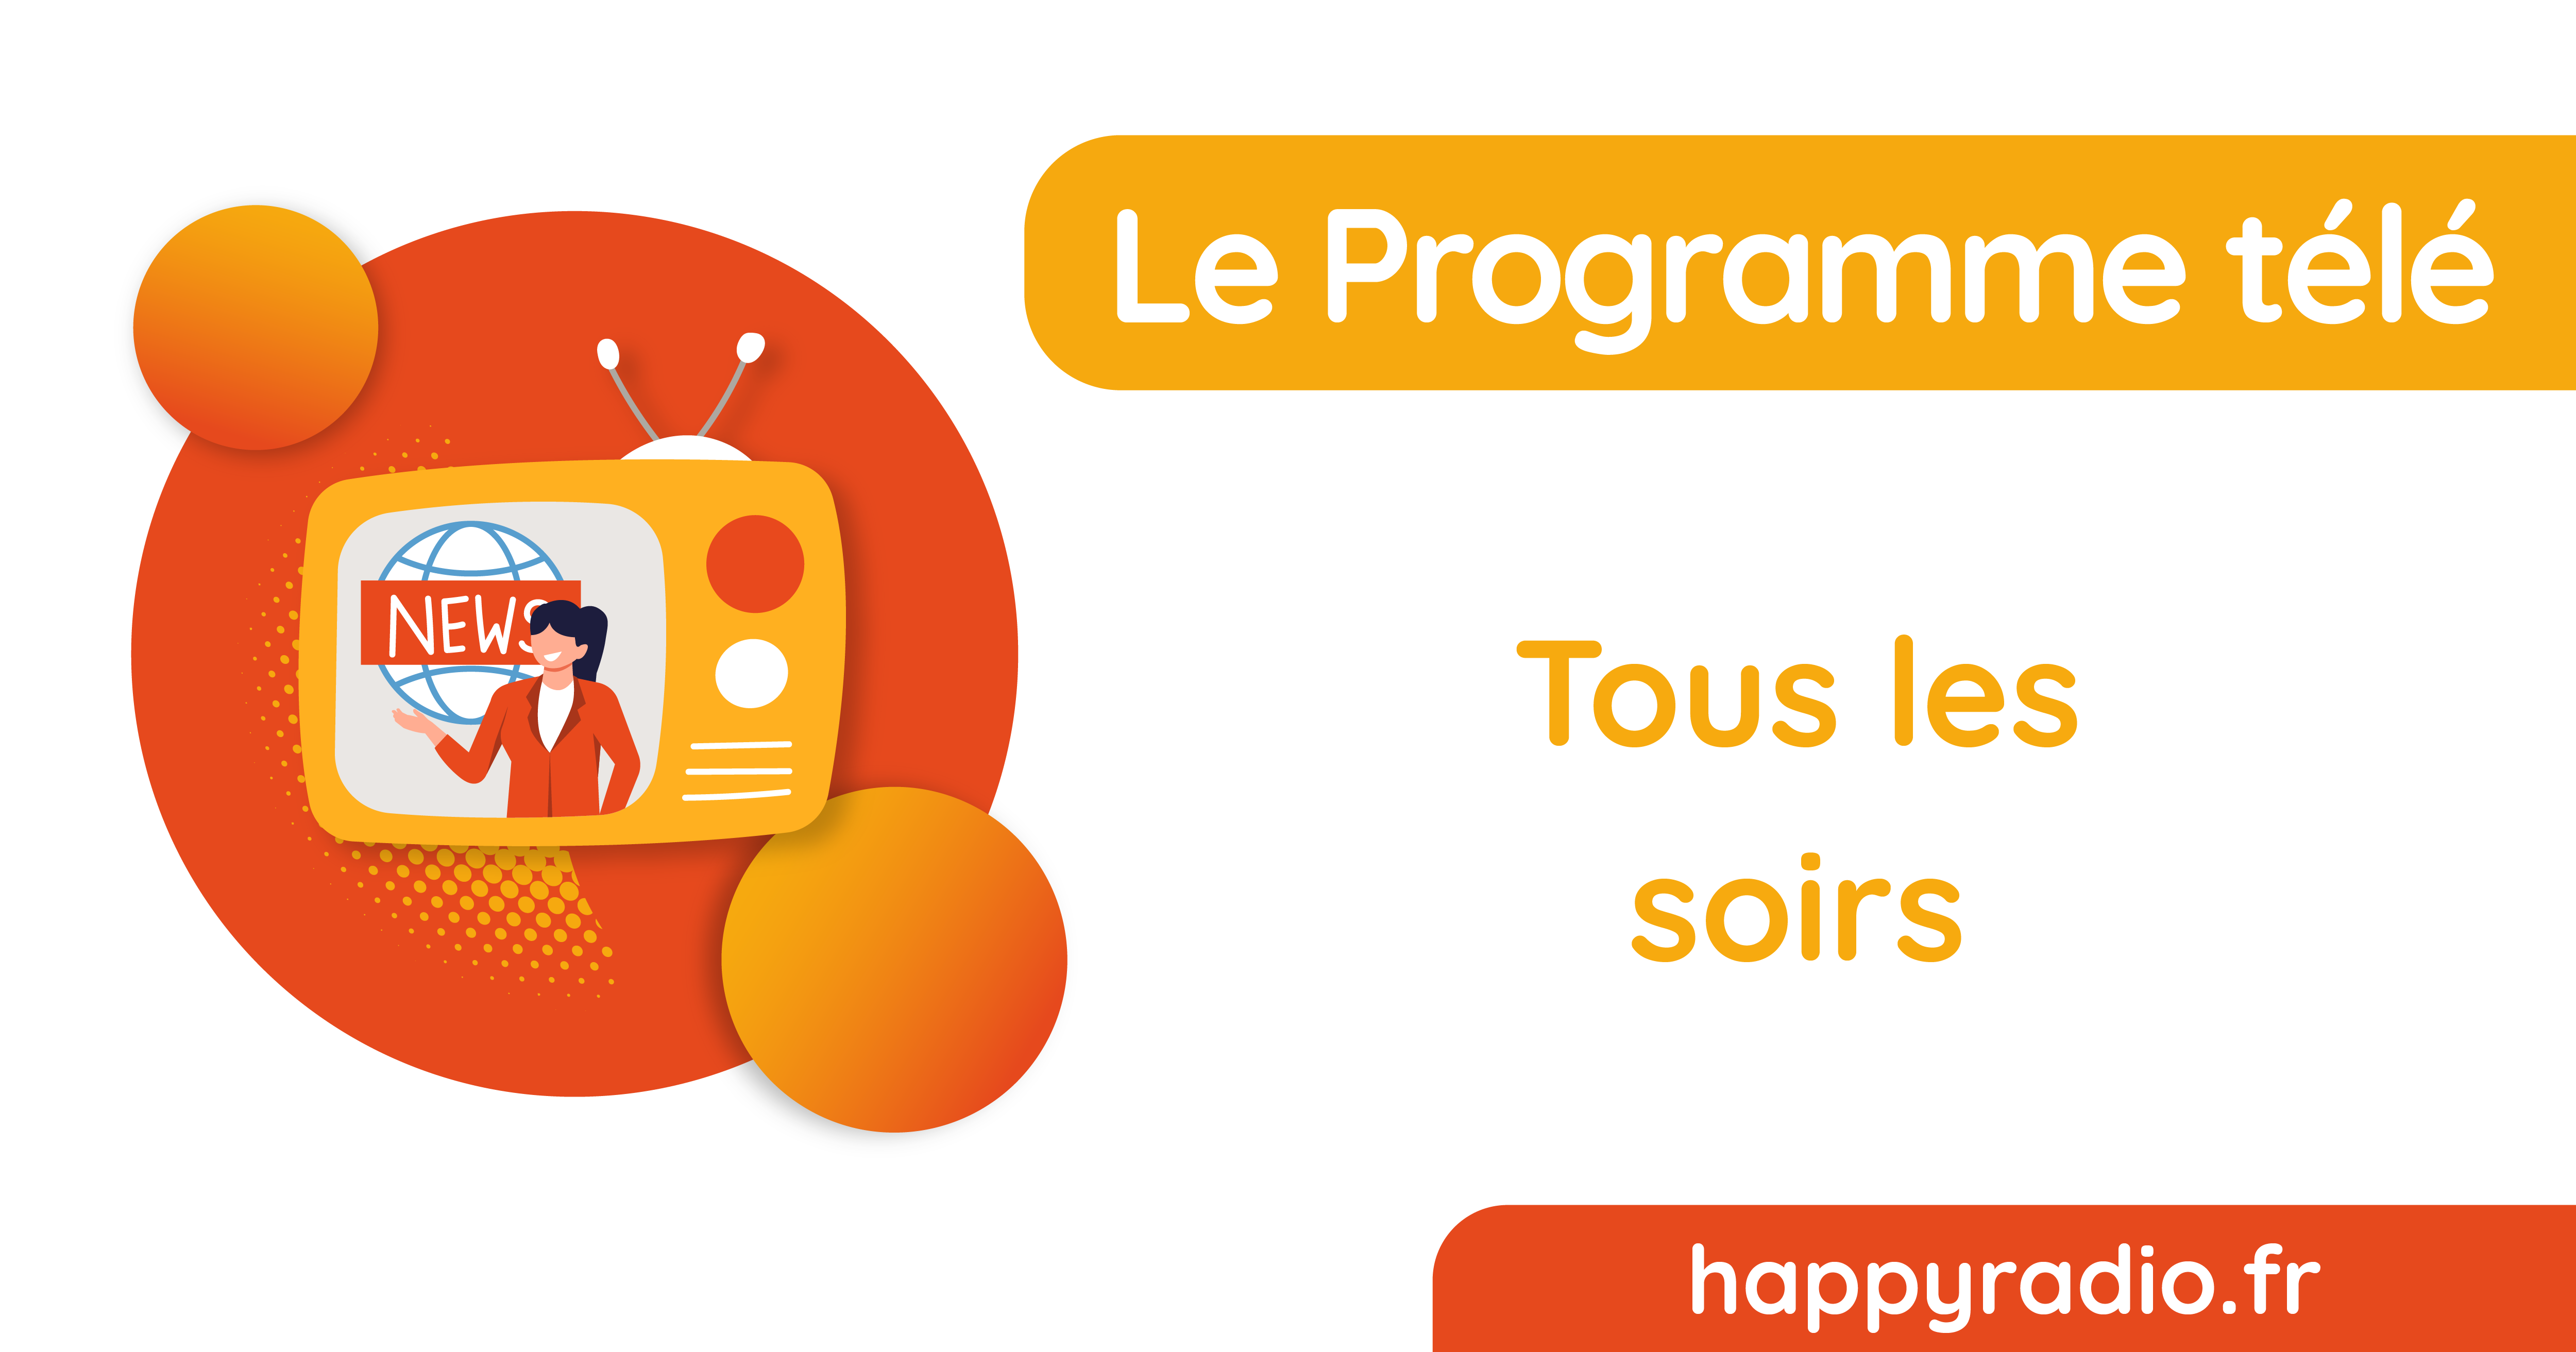 You are currently viewing Le Programme télé